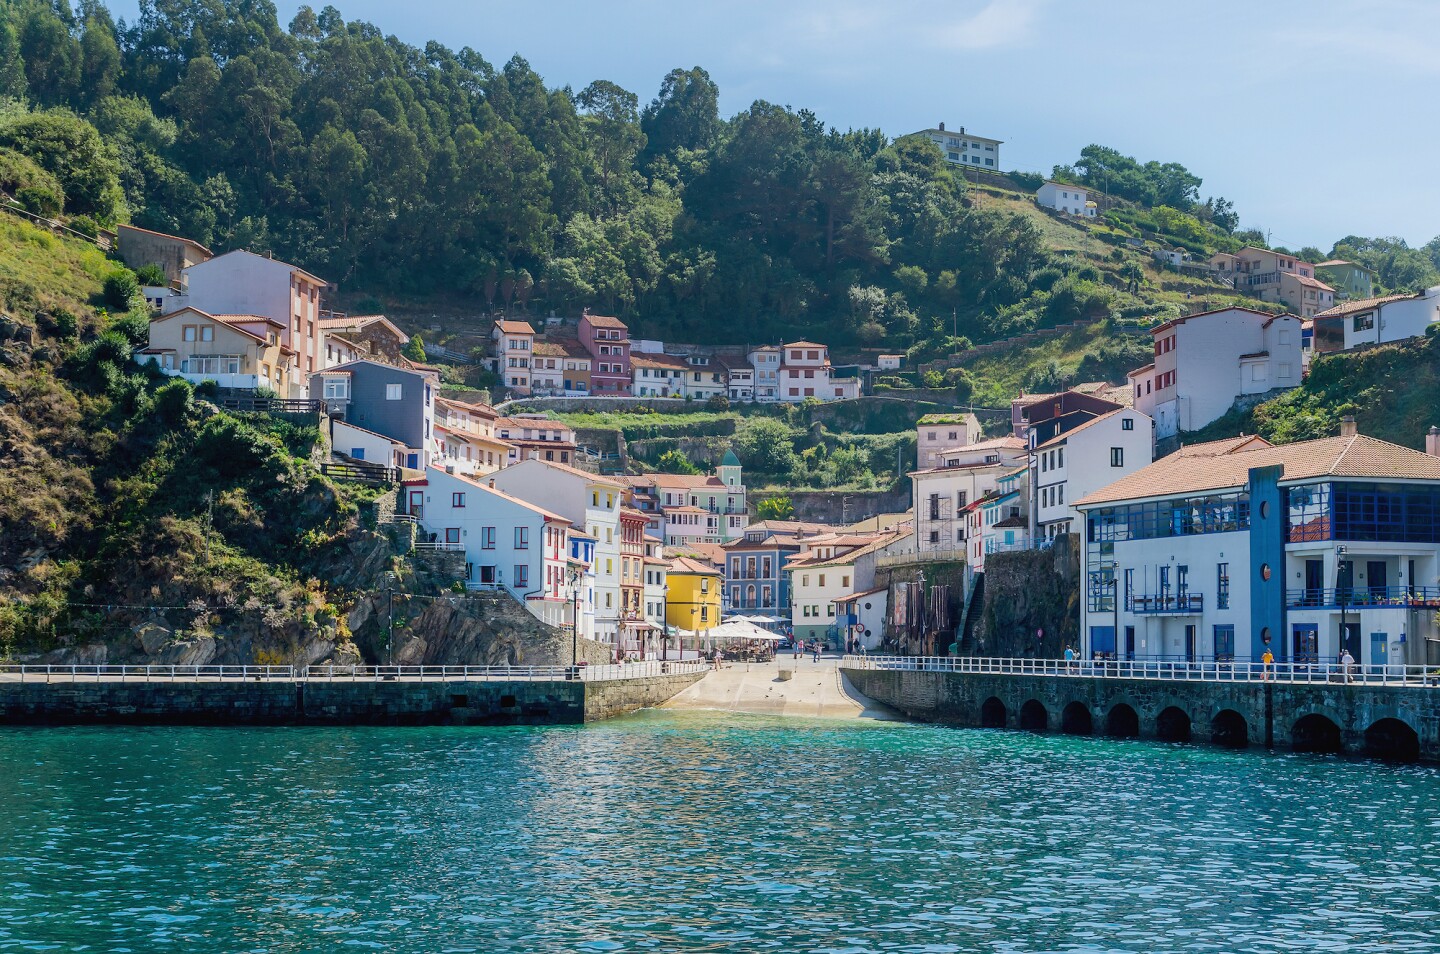 <h2>8. Cudillero</h2> <p><i>Asturias</i></p> <p>Many of Spain’s big cities attract tourists from around the world, so much so that its <a class="Link" href="https://www.afar.com/magazine/the-most-beautiful-villages-in-spain" rel="noopener">beautiful small villages</a> can be overlooked. Cudillero is one of the nearly 20,000 pueblos found throughout Spain, and a lovely one at that: Located by the Bay of Biscay, this fishing village of around 5,000 people is a masterclass of slow living by the sea. Colorful, orange-roofed houses dot the hillsides, which also serve as vantage points for panoramas of both town and ocean.</p>